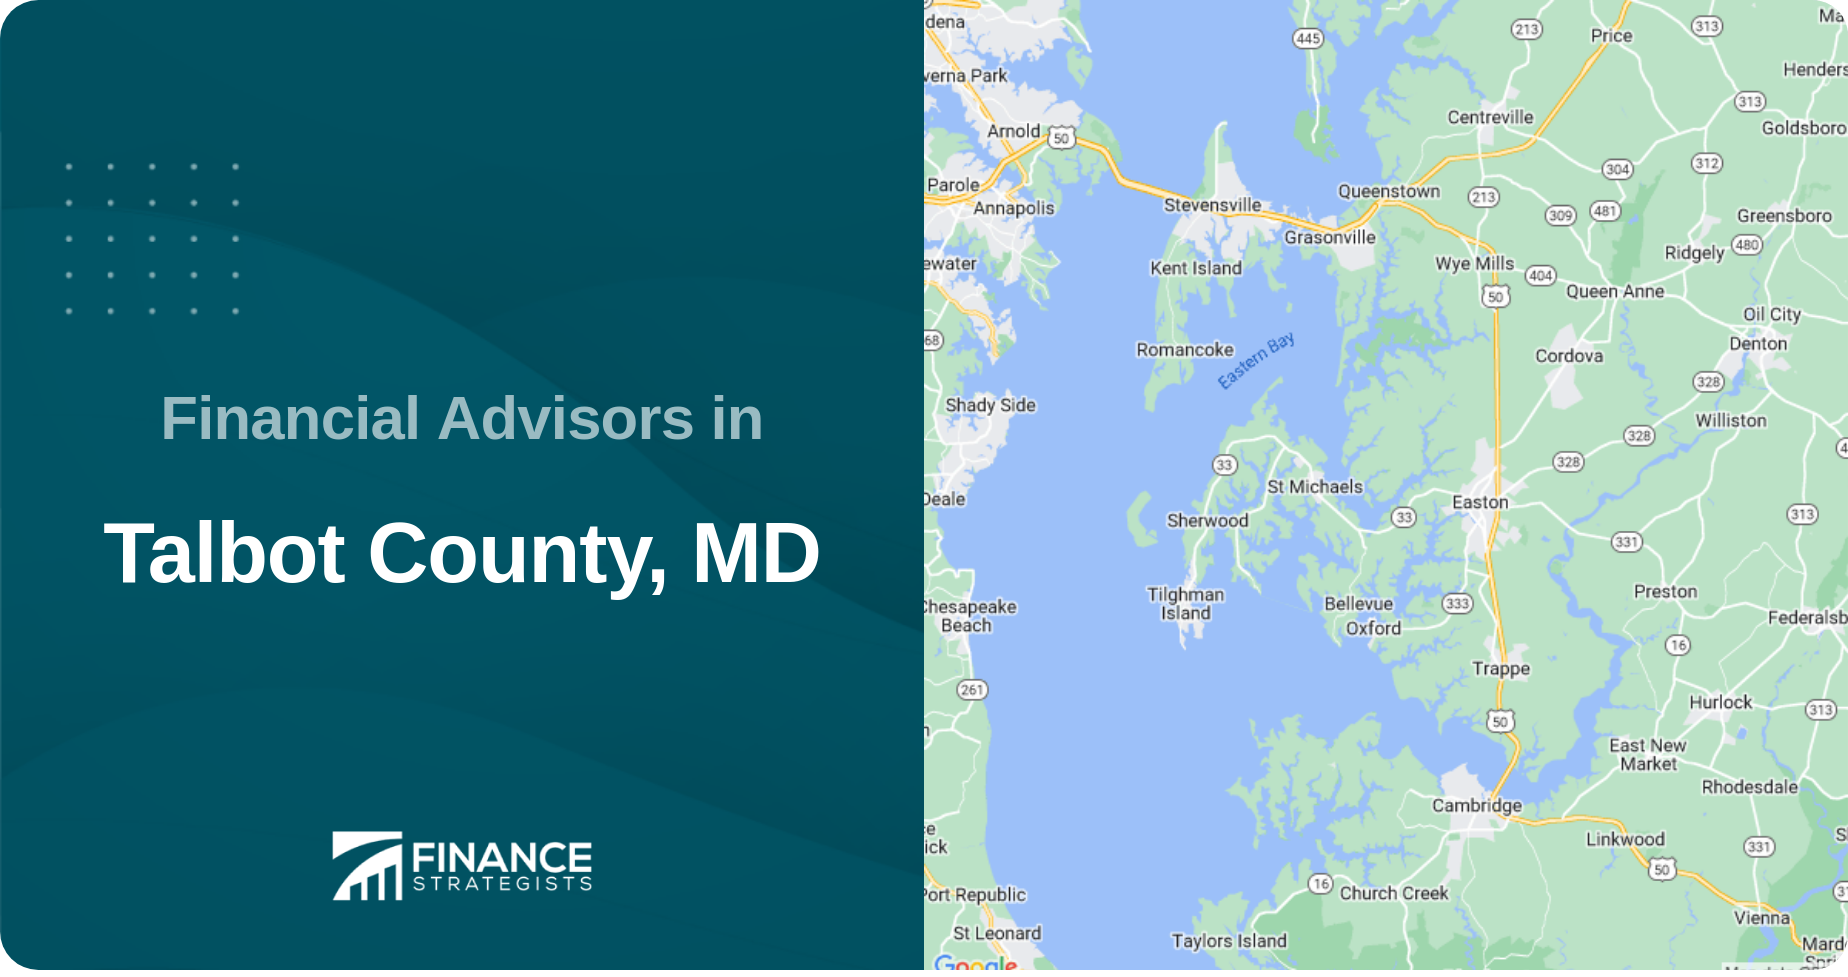 Financial Advisors in Talbot County, MD